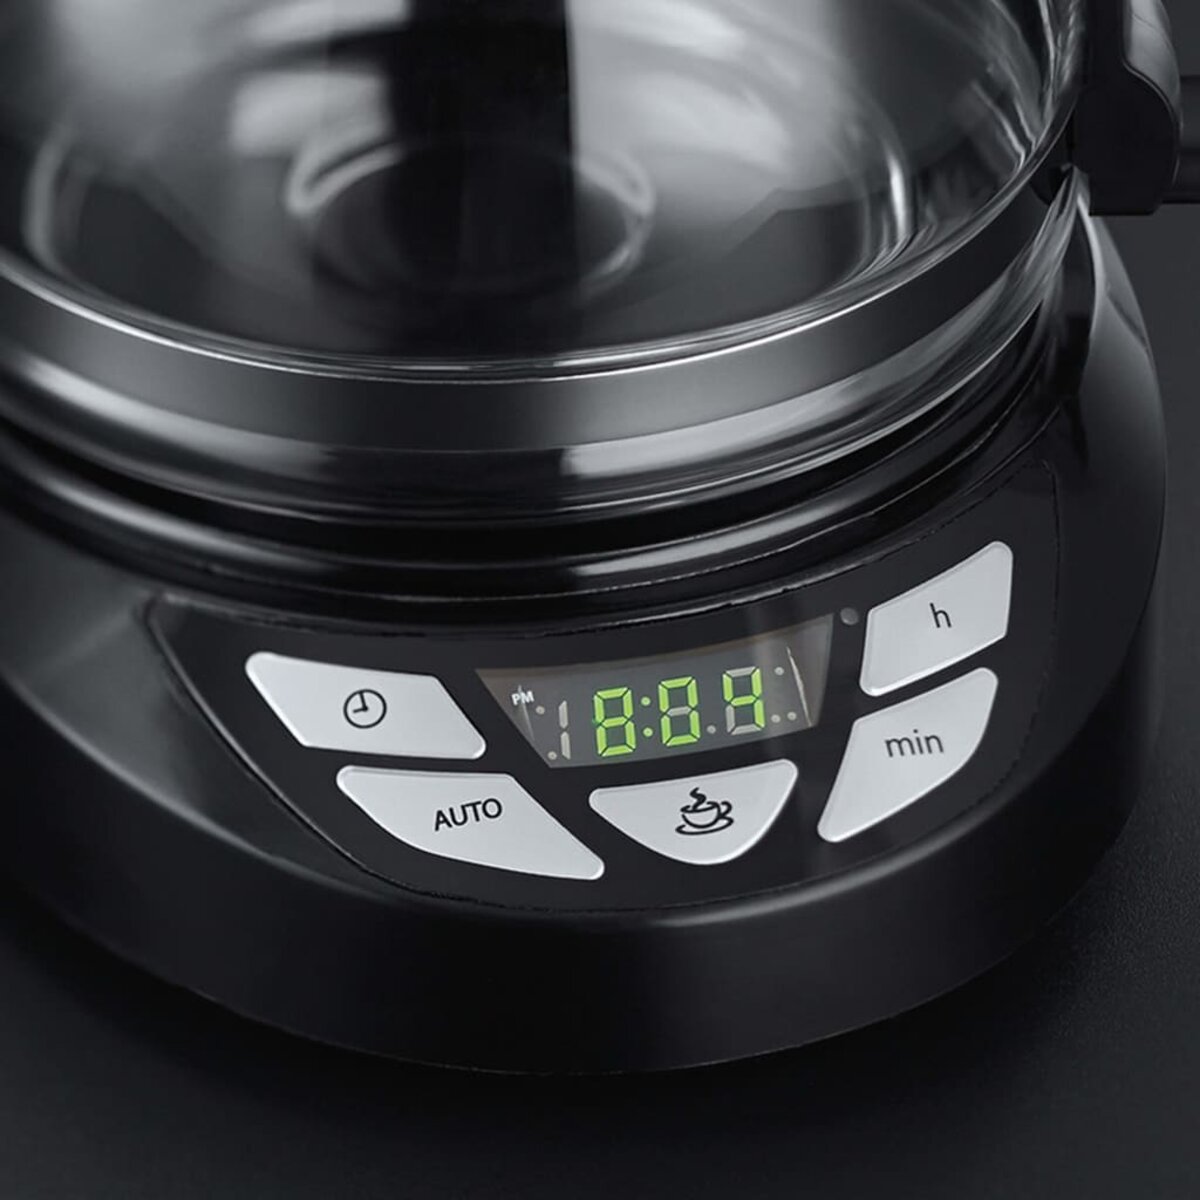 CAFETIÉRE PROGRAMMABLE RUSSELL HOBBS TEXTURES PLUS / 975W